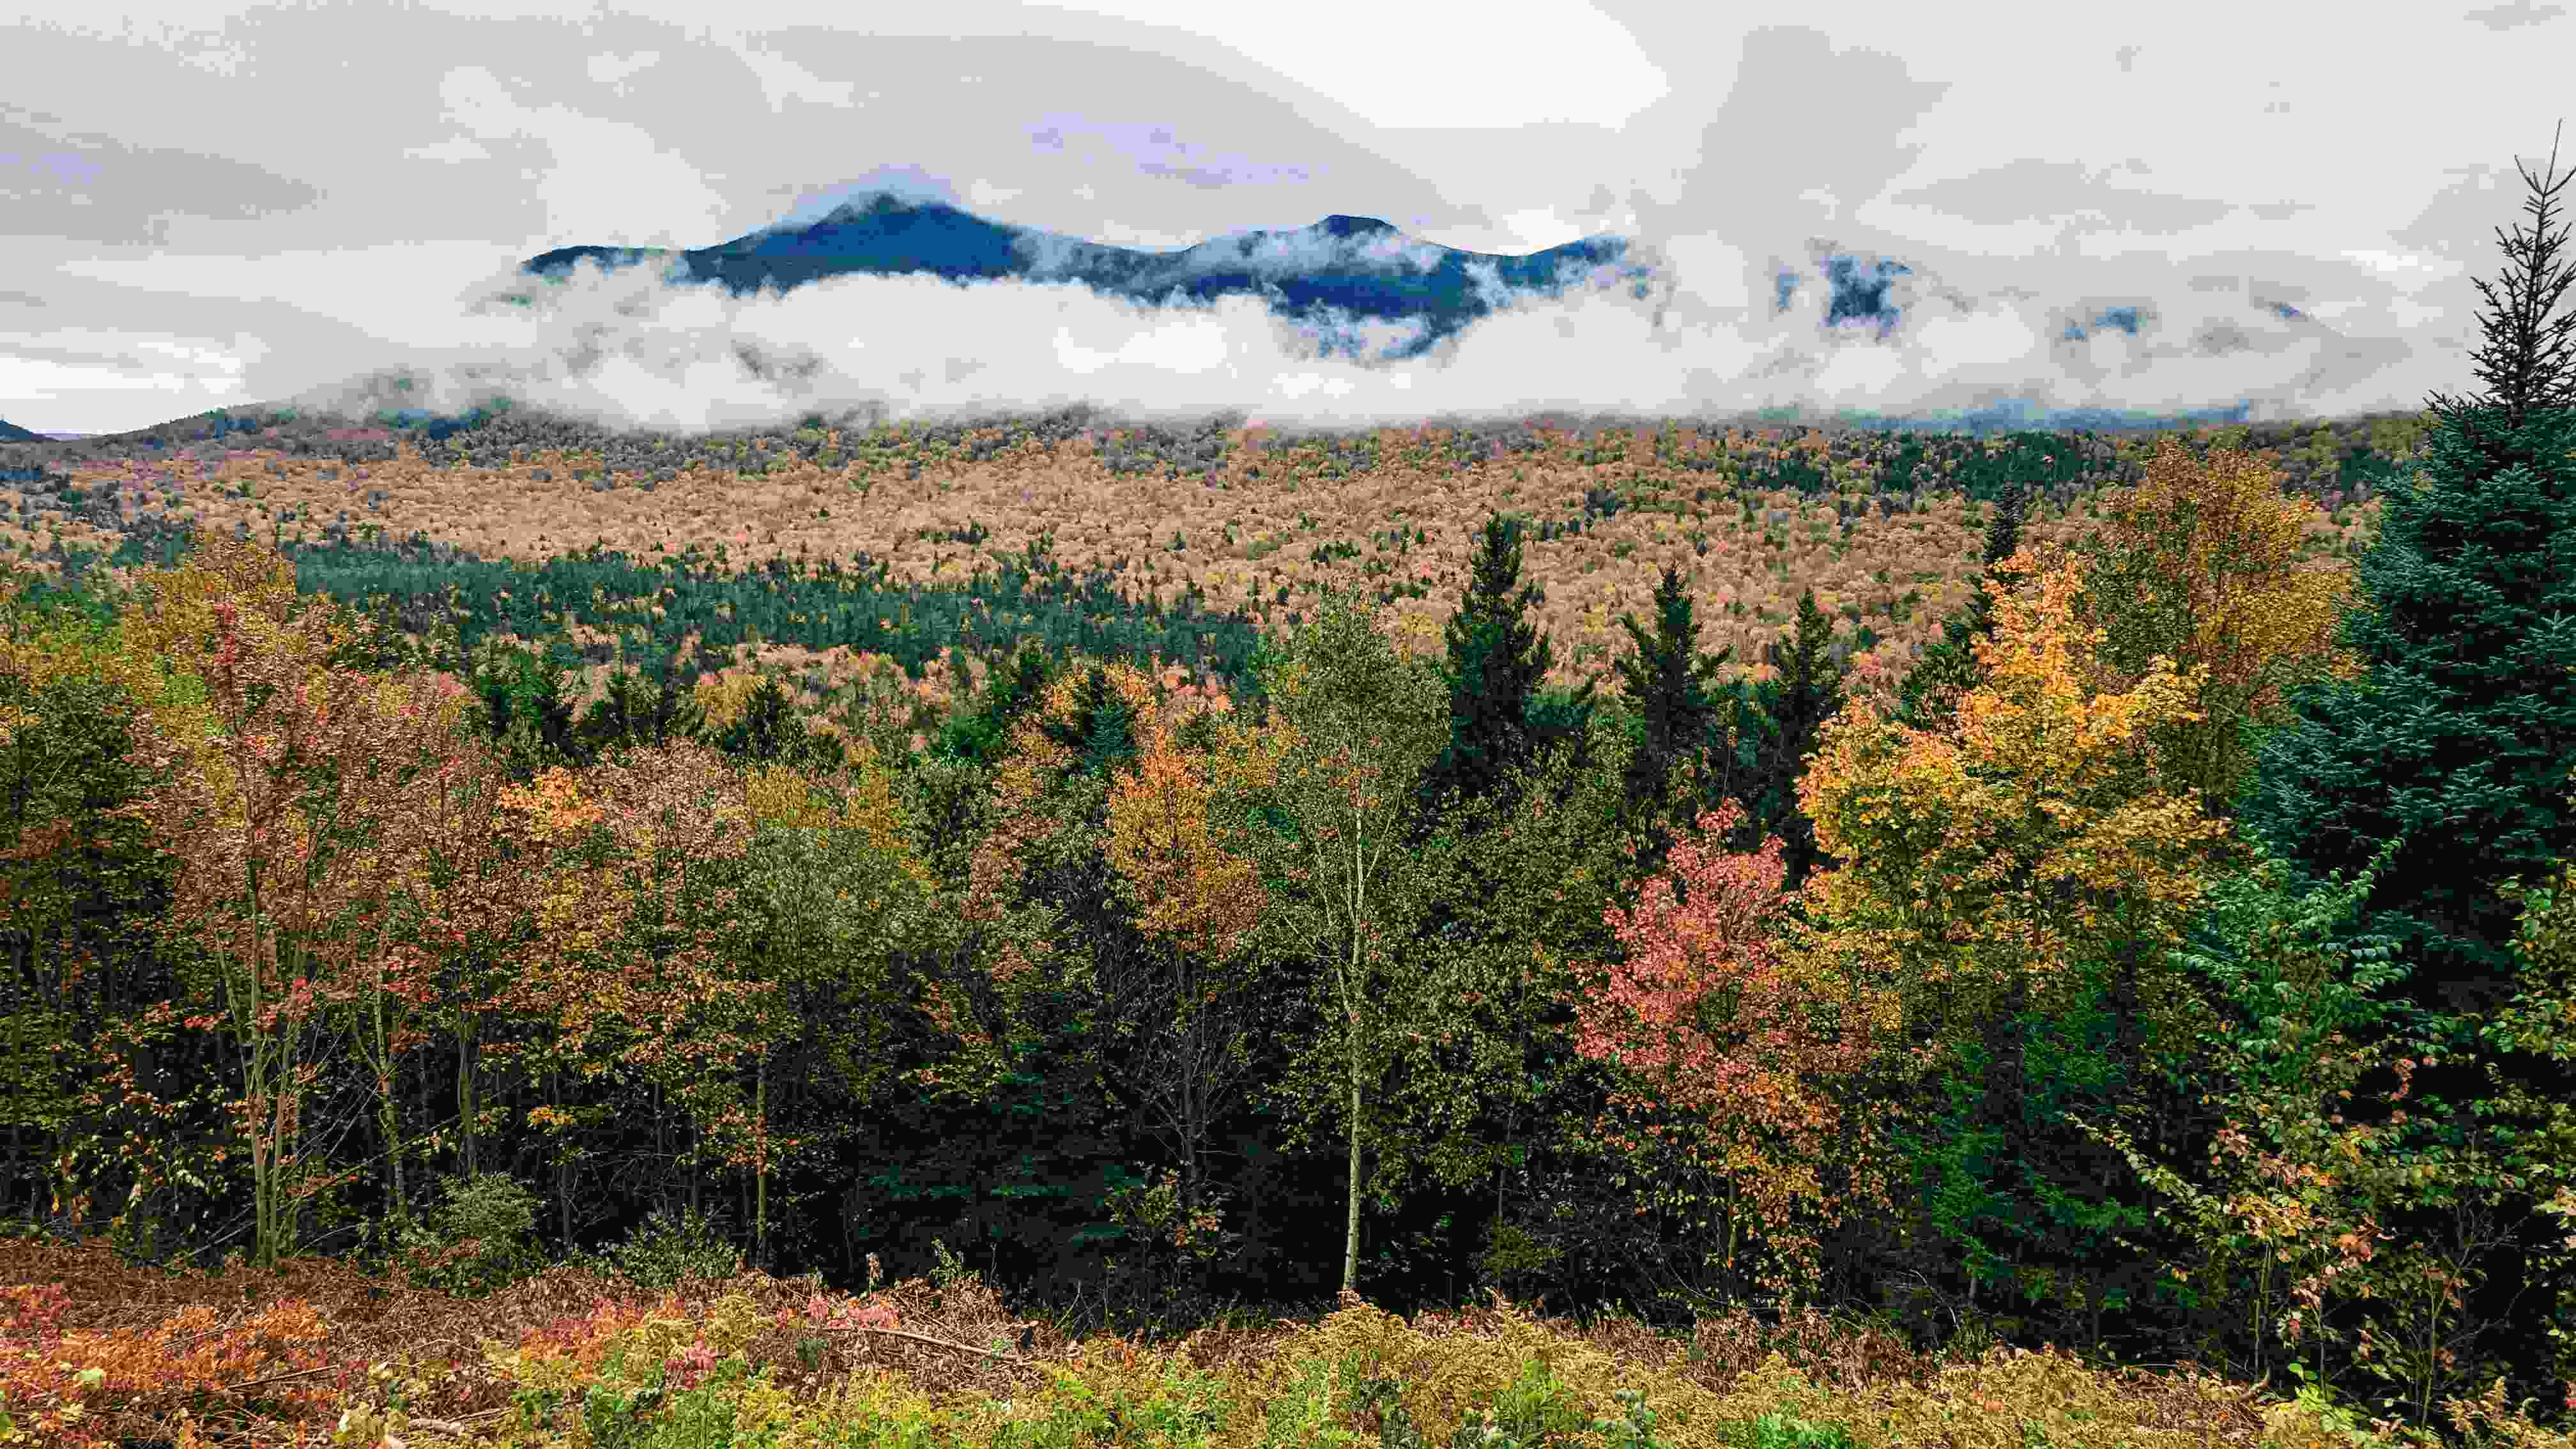 An overview photo of fall foliage and mountains surrounded by clouds